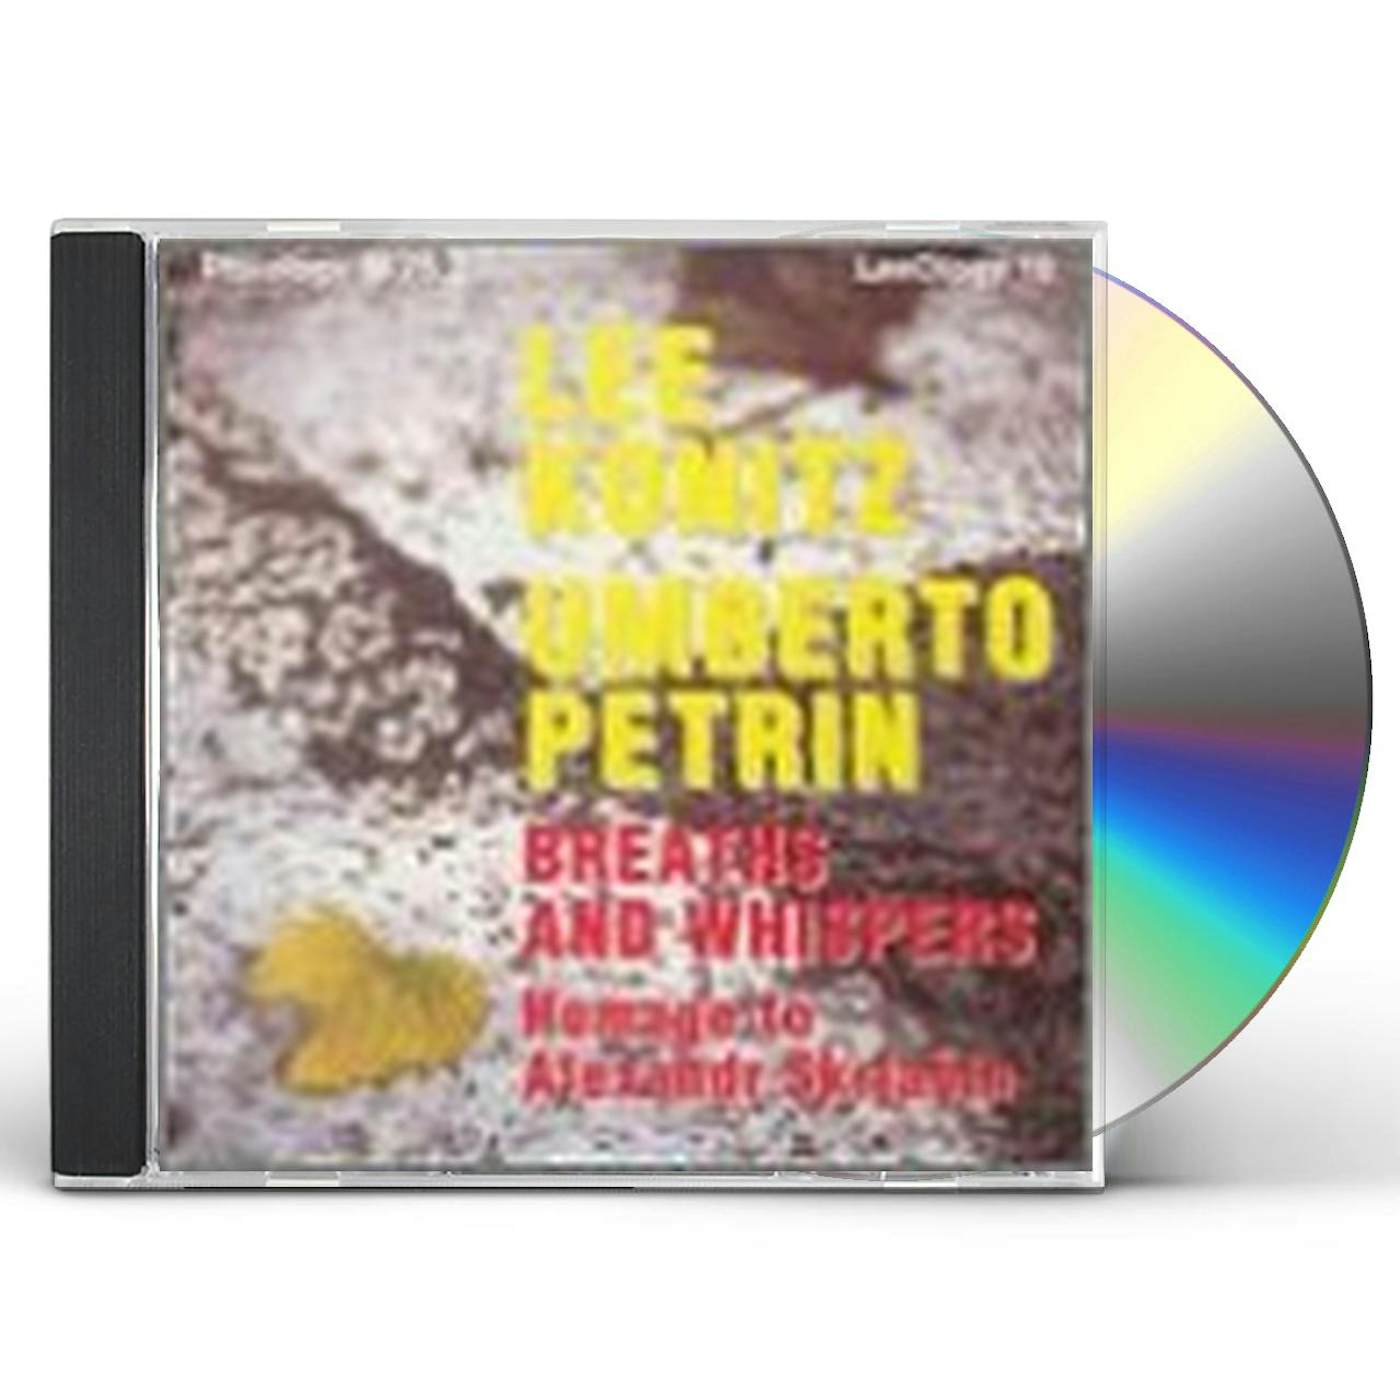 Lee Konitz BREATHS AND WHISPERS CD